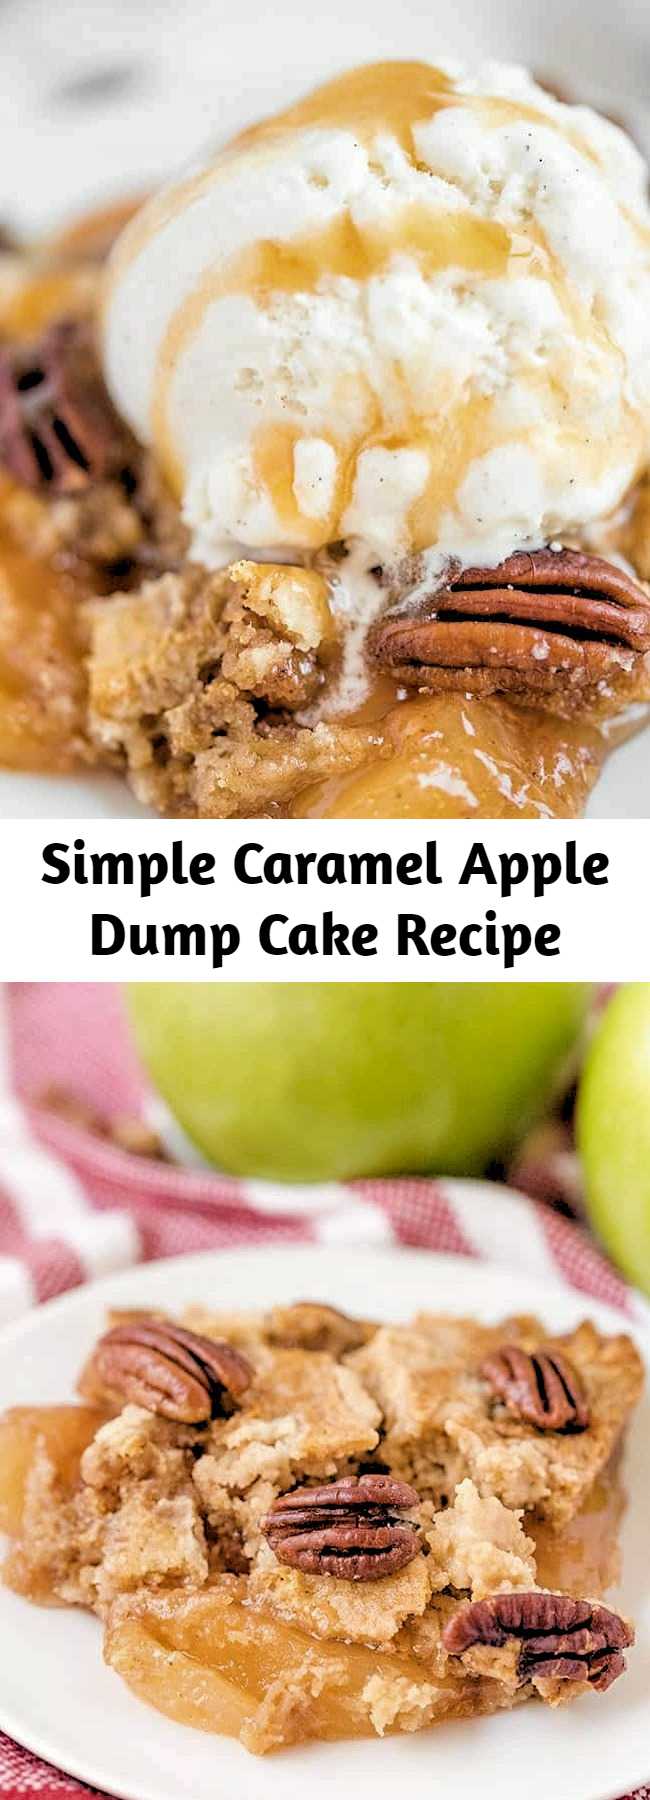 Simple Caramel Apple Dump Cake Recipe - A simple recipe for Caramel Apple Dump cake made with butter pecan cake mix and apple pie filling! A tender and moist spiced cake with tender apples throughout topped with nuts and a caramel drizzle that is the perfect amount of sweetness. Add a scoop of ice cream or dollop of whipped cream and you have a straightforward dessert is crowd worthy. #dumpcake #caramel #apples